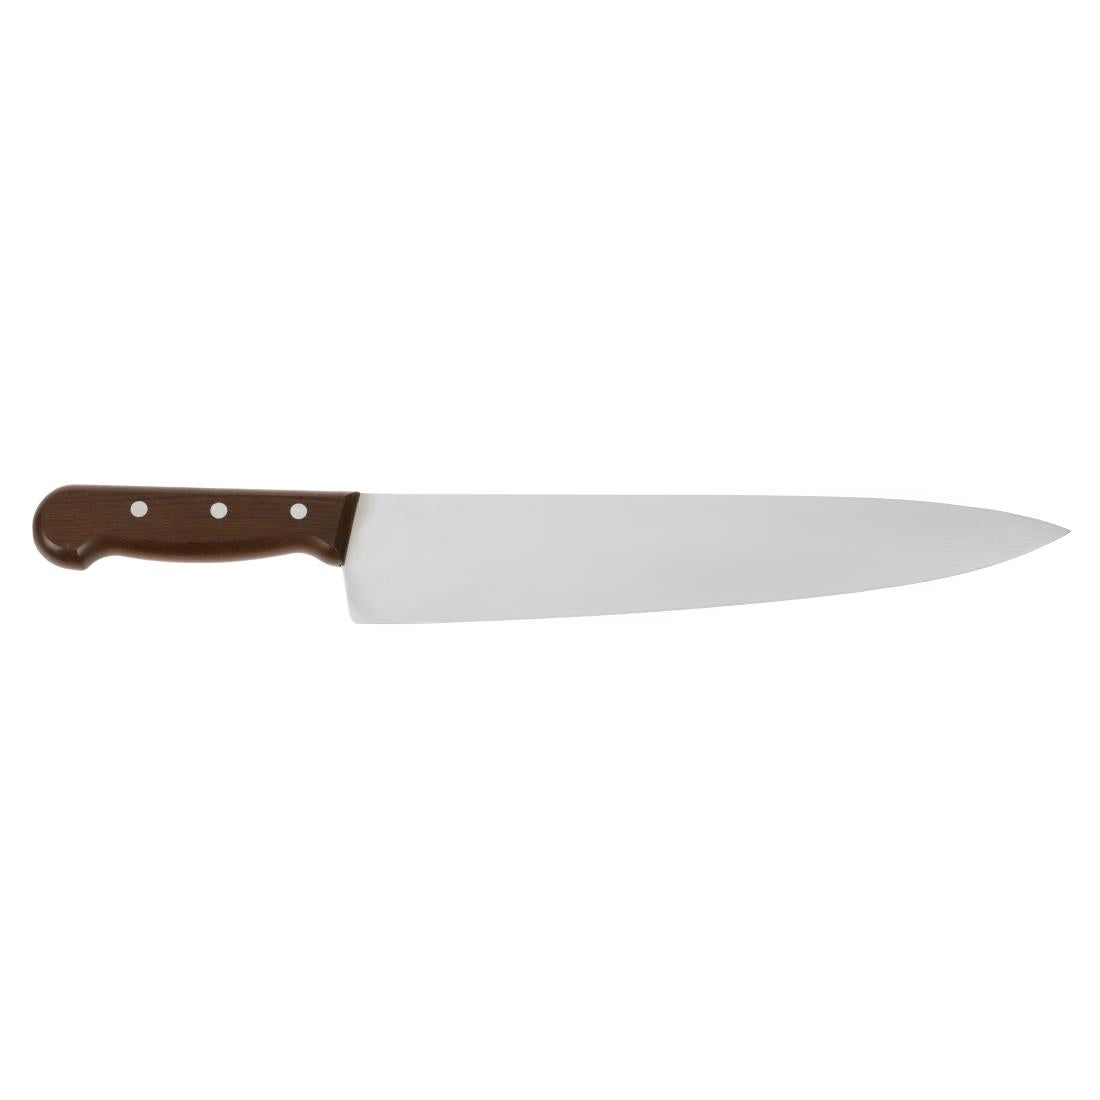 Victorinox Wooden Handled Carving Knife 31cm